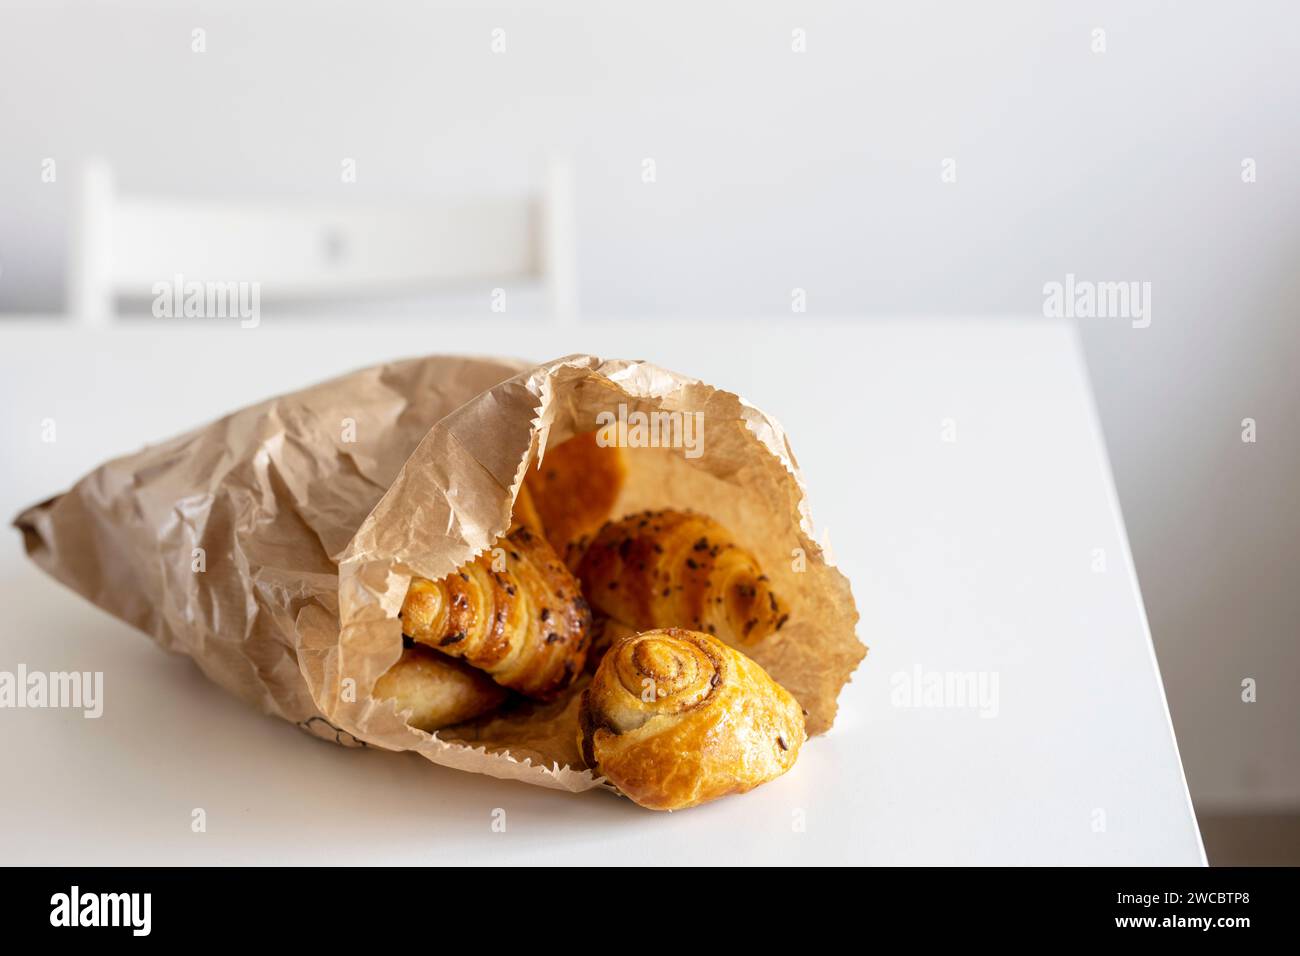 Fresh pastries - croissants with chocolate chips, poppy seed buns on a white sheet of paper on the table. Place for text Stock Photo